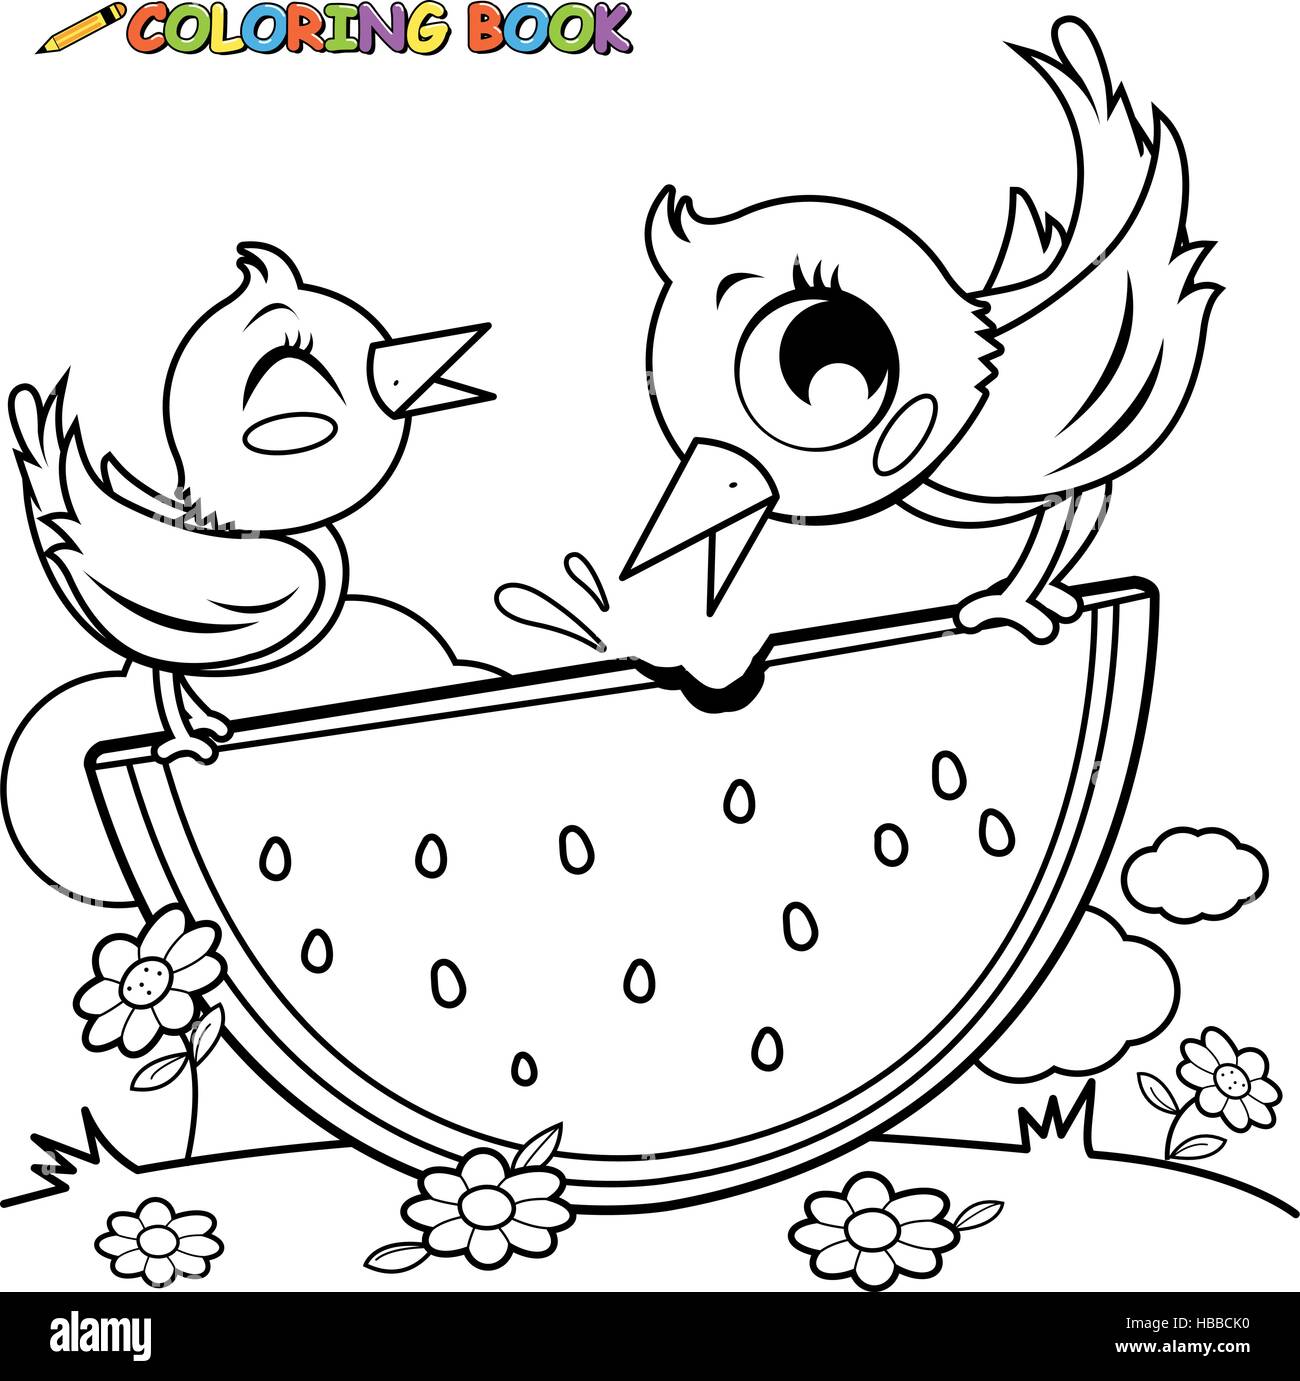 Birds eating watermelon coloring book page. Stock Vector